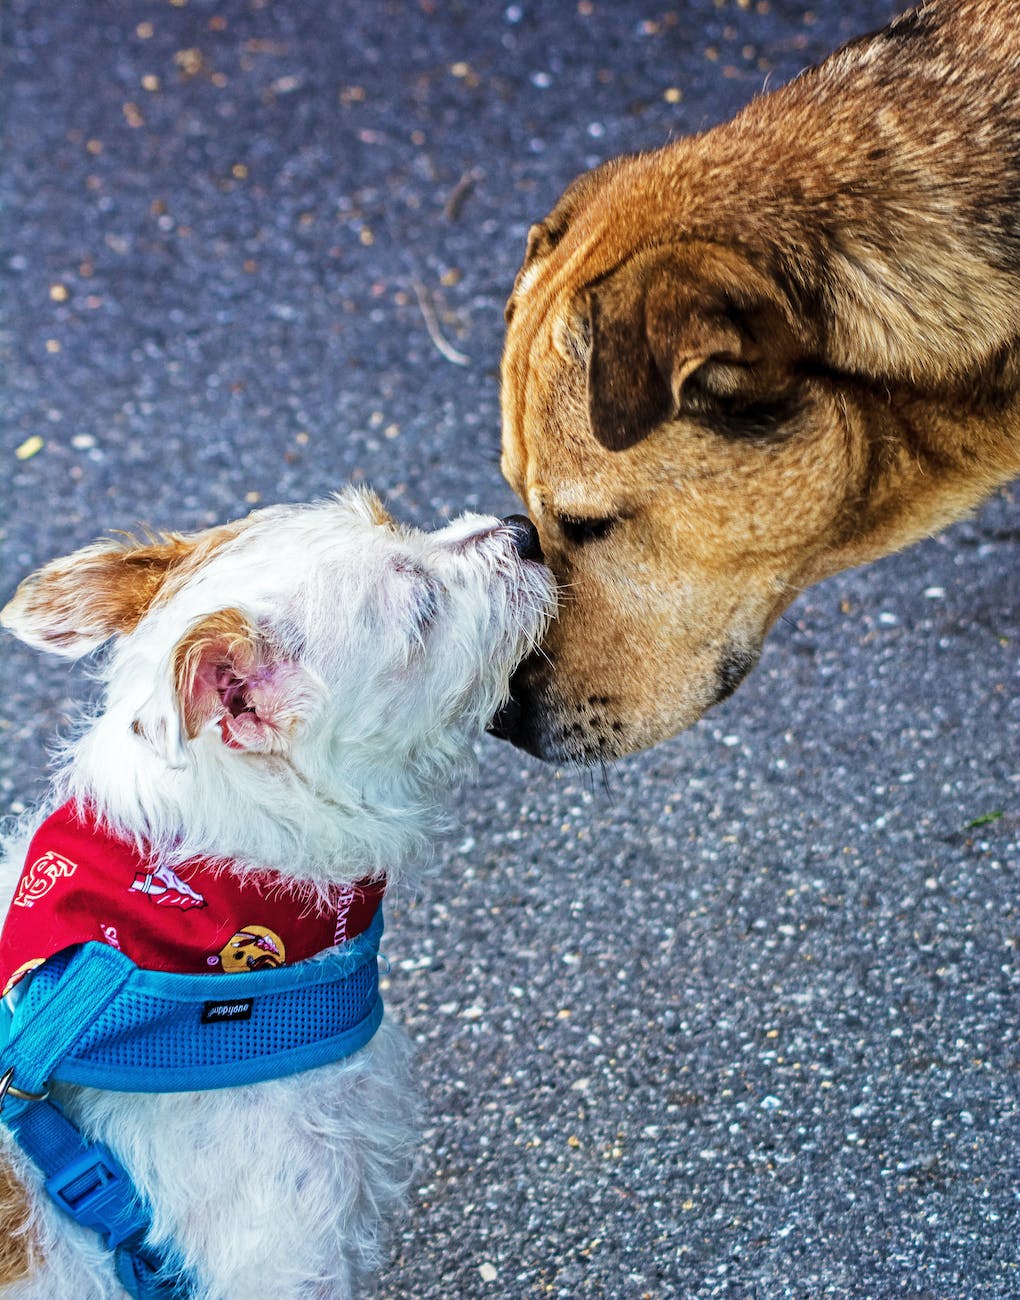 The Top 4 Strategies for Training and Managing Your Dog’s Behavior